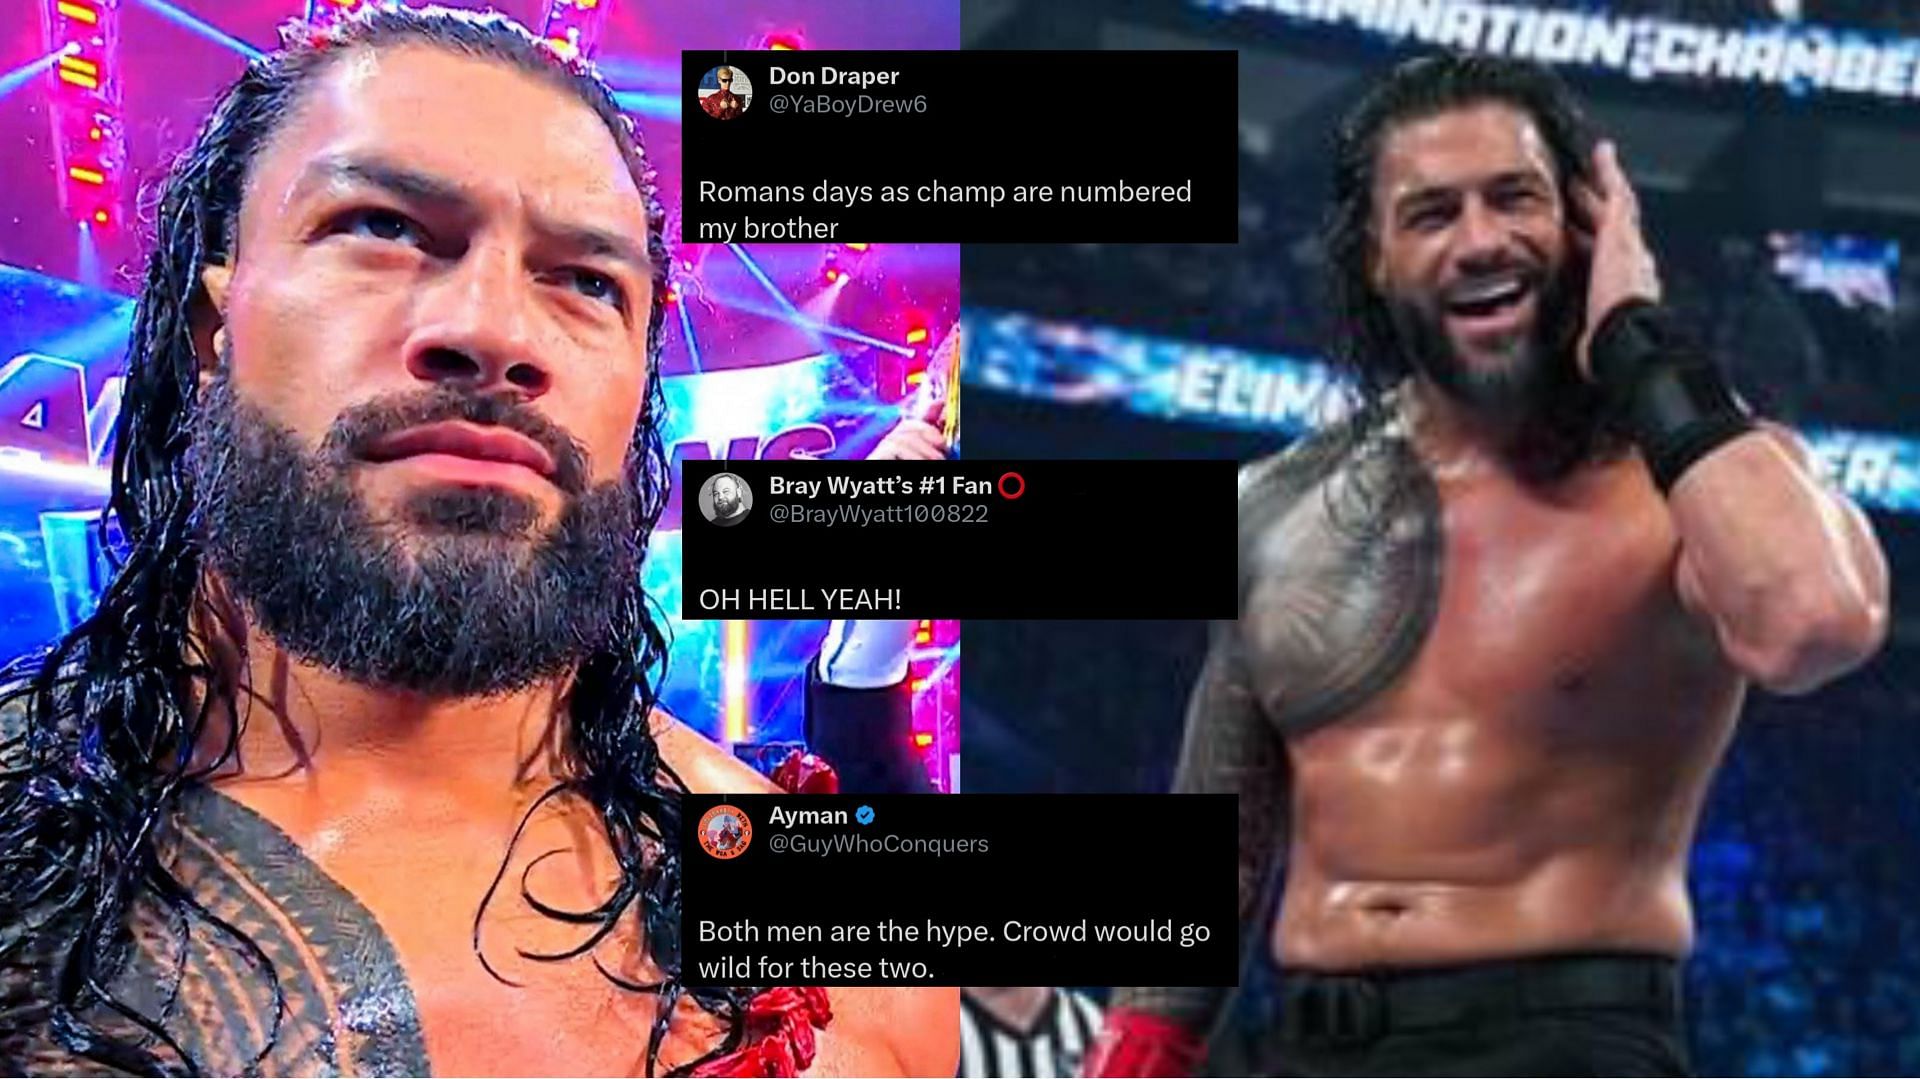 "It'll be earth-shattering"- Fans react to popular SmackDown segment potentially leading to a match between Roman Reigns and top star